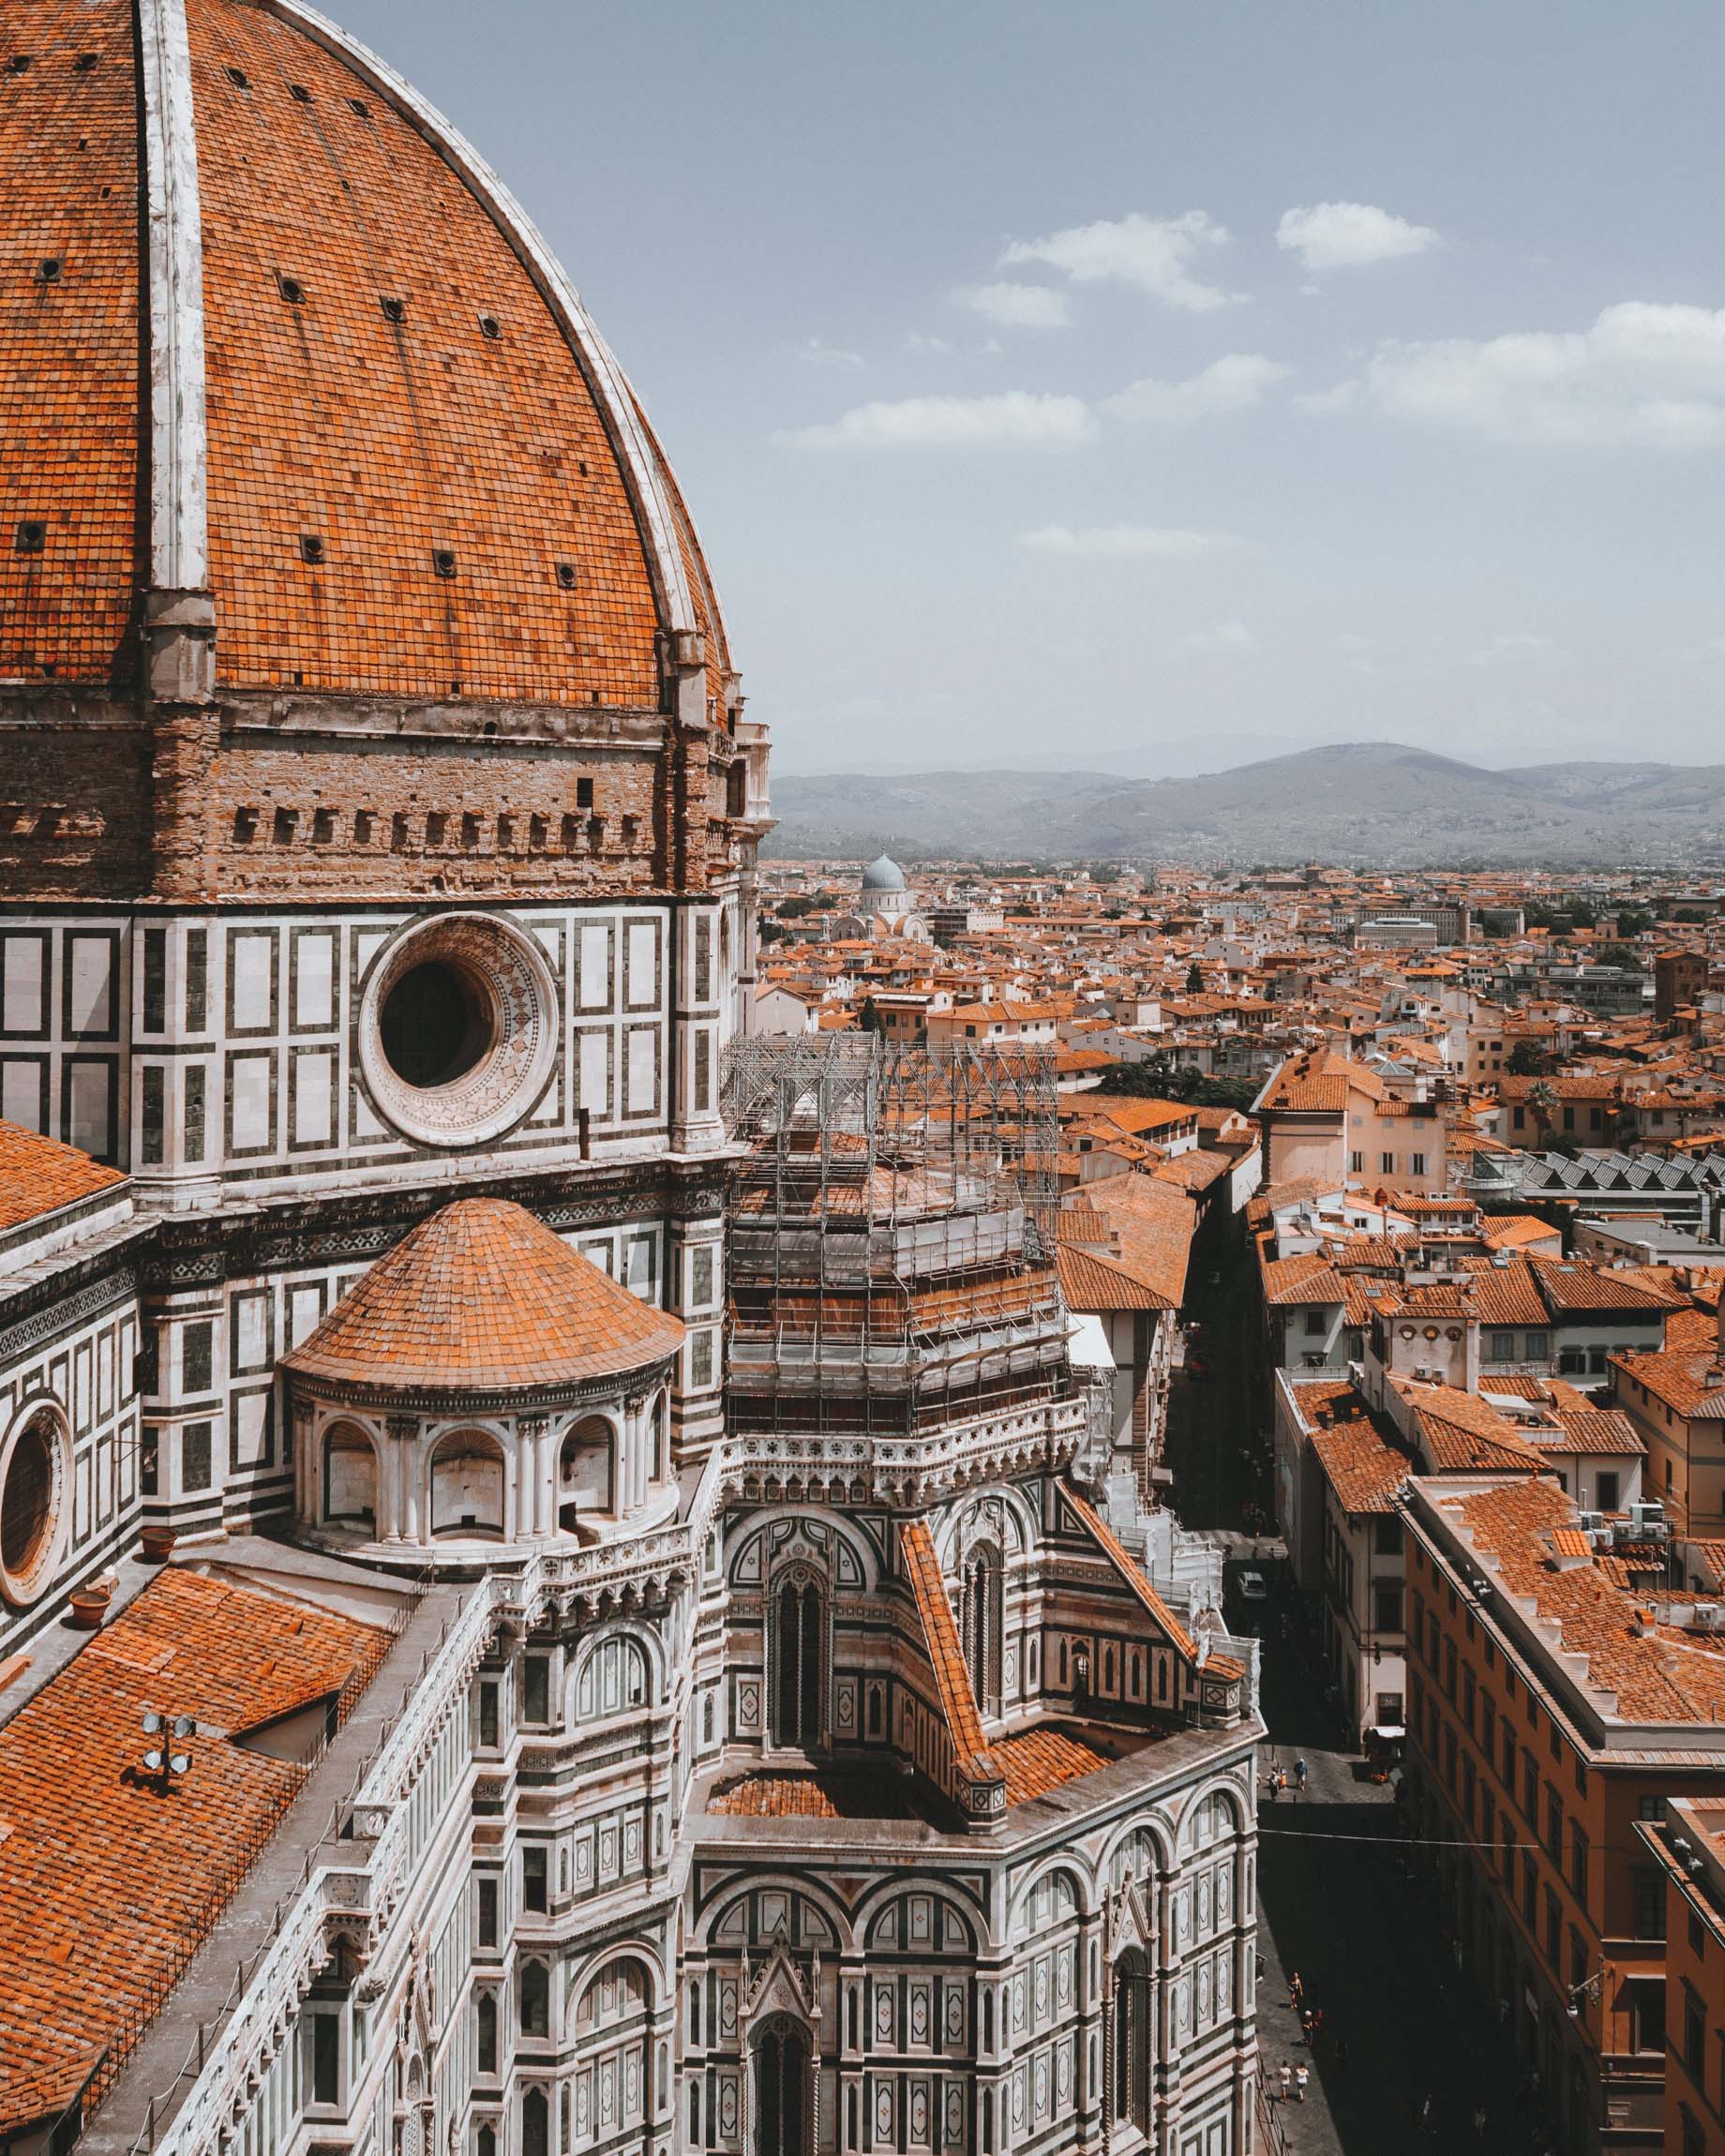 Relais Santa Croce By Baglioni Hotels & Resorts – Florence, Italy – Cathedral of Santa Maria del Fiore